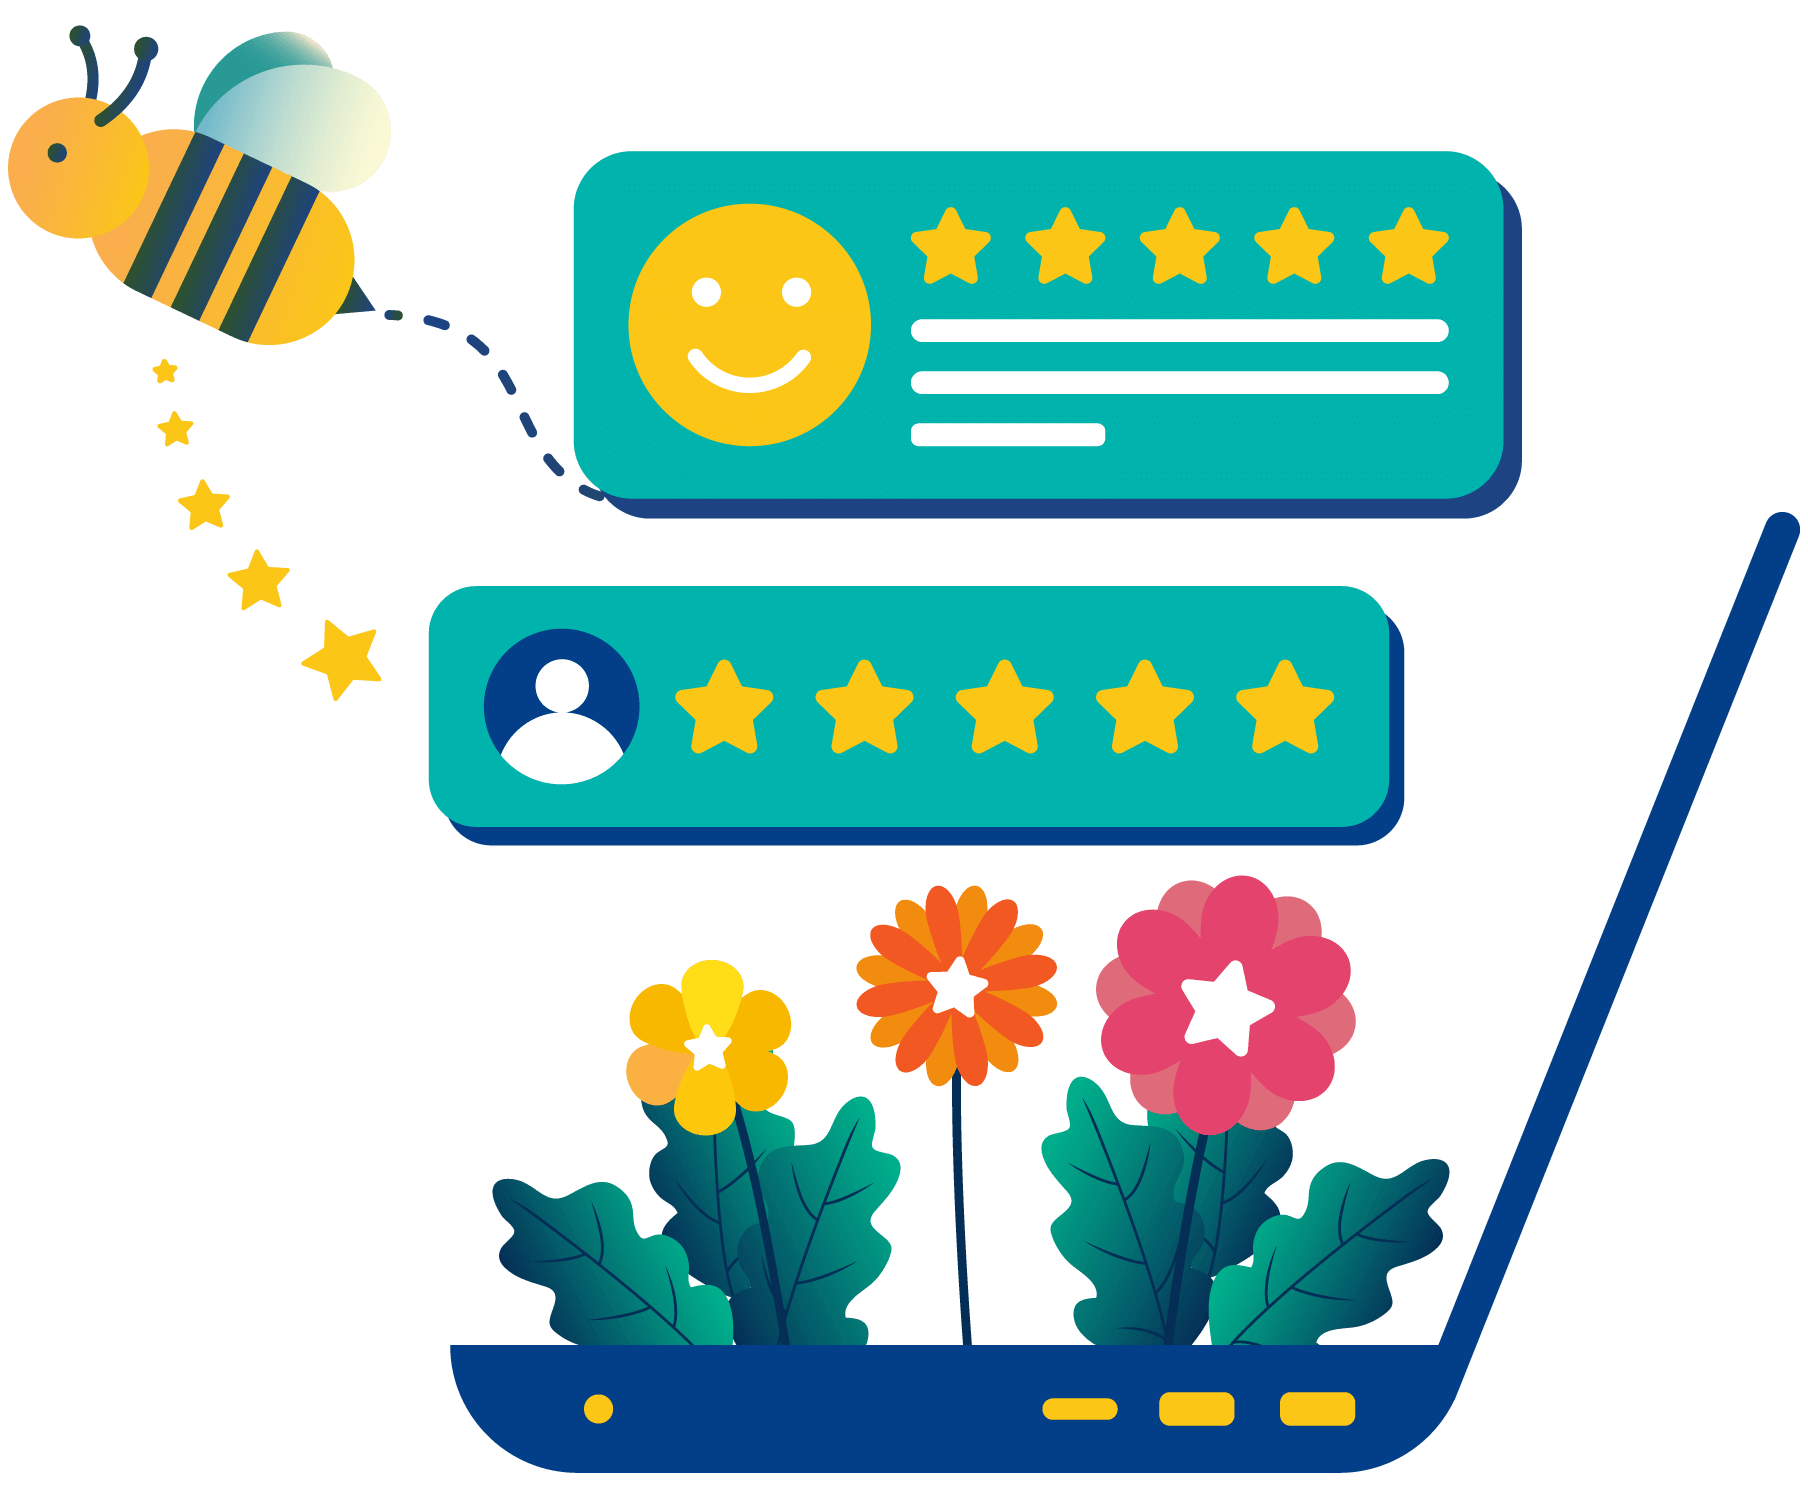 rater8's automated algorithm, pollin8, builds 5-star reviews across the top healthcare review sites